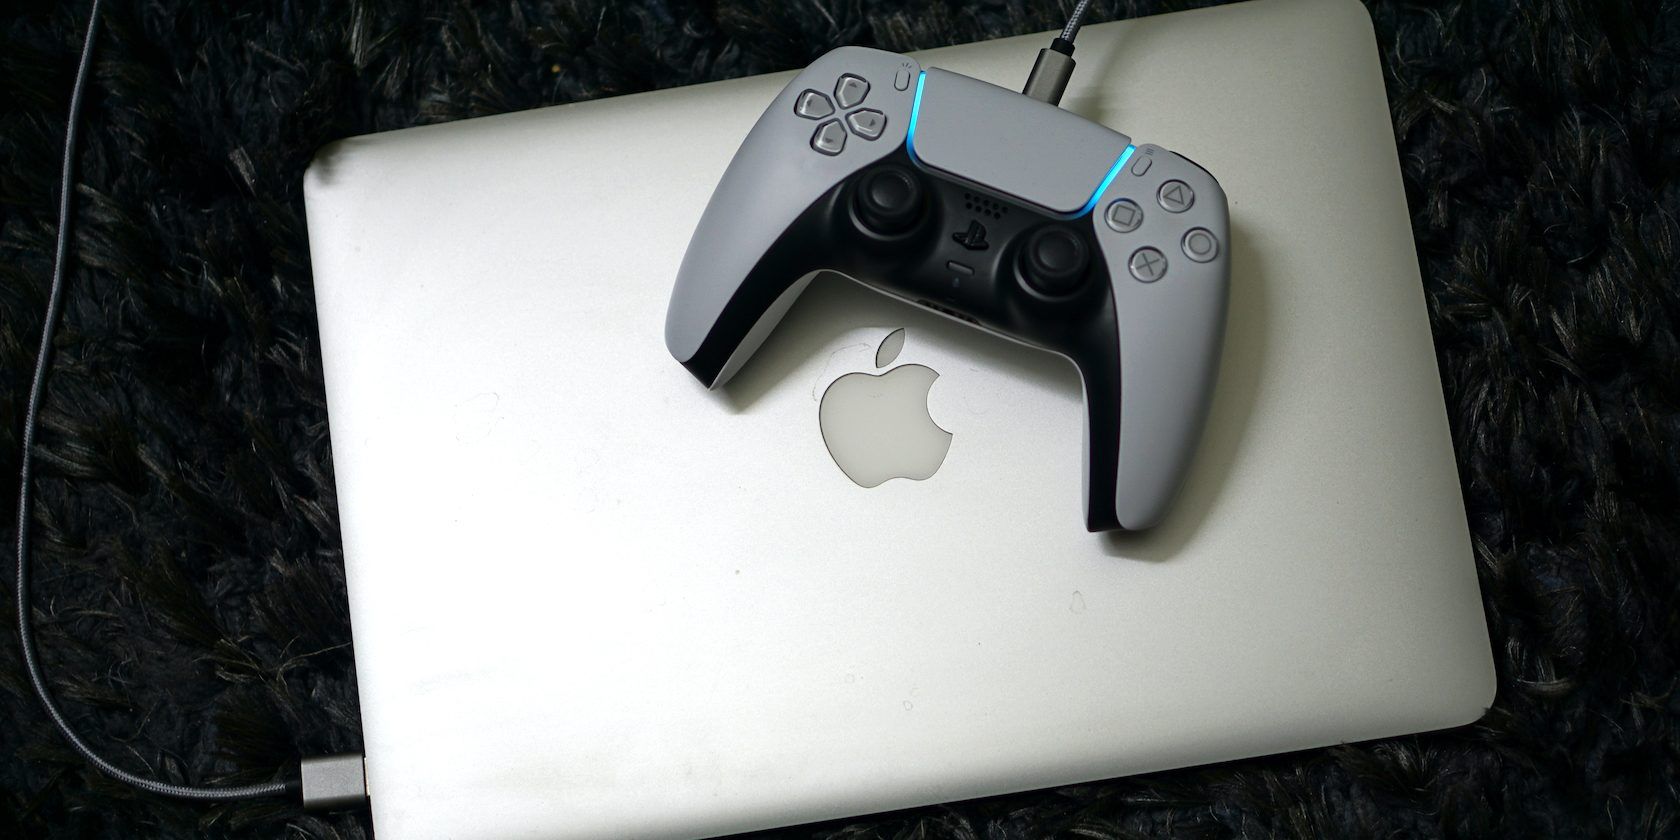 mac controllers for steam